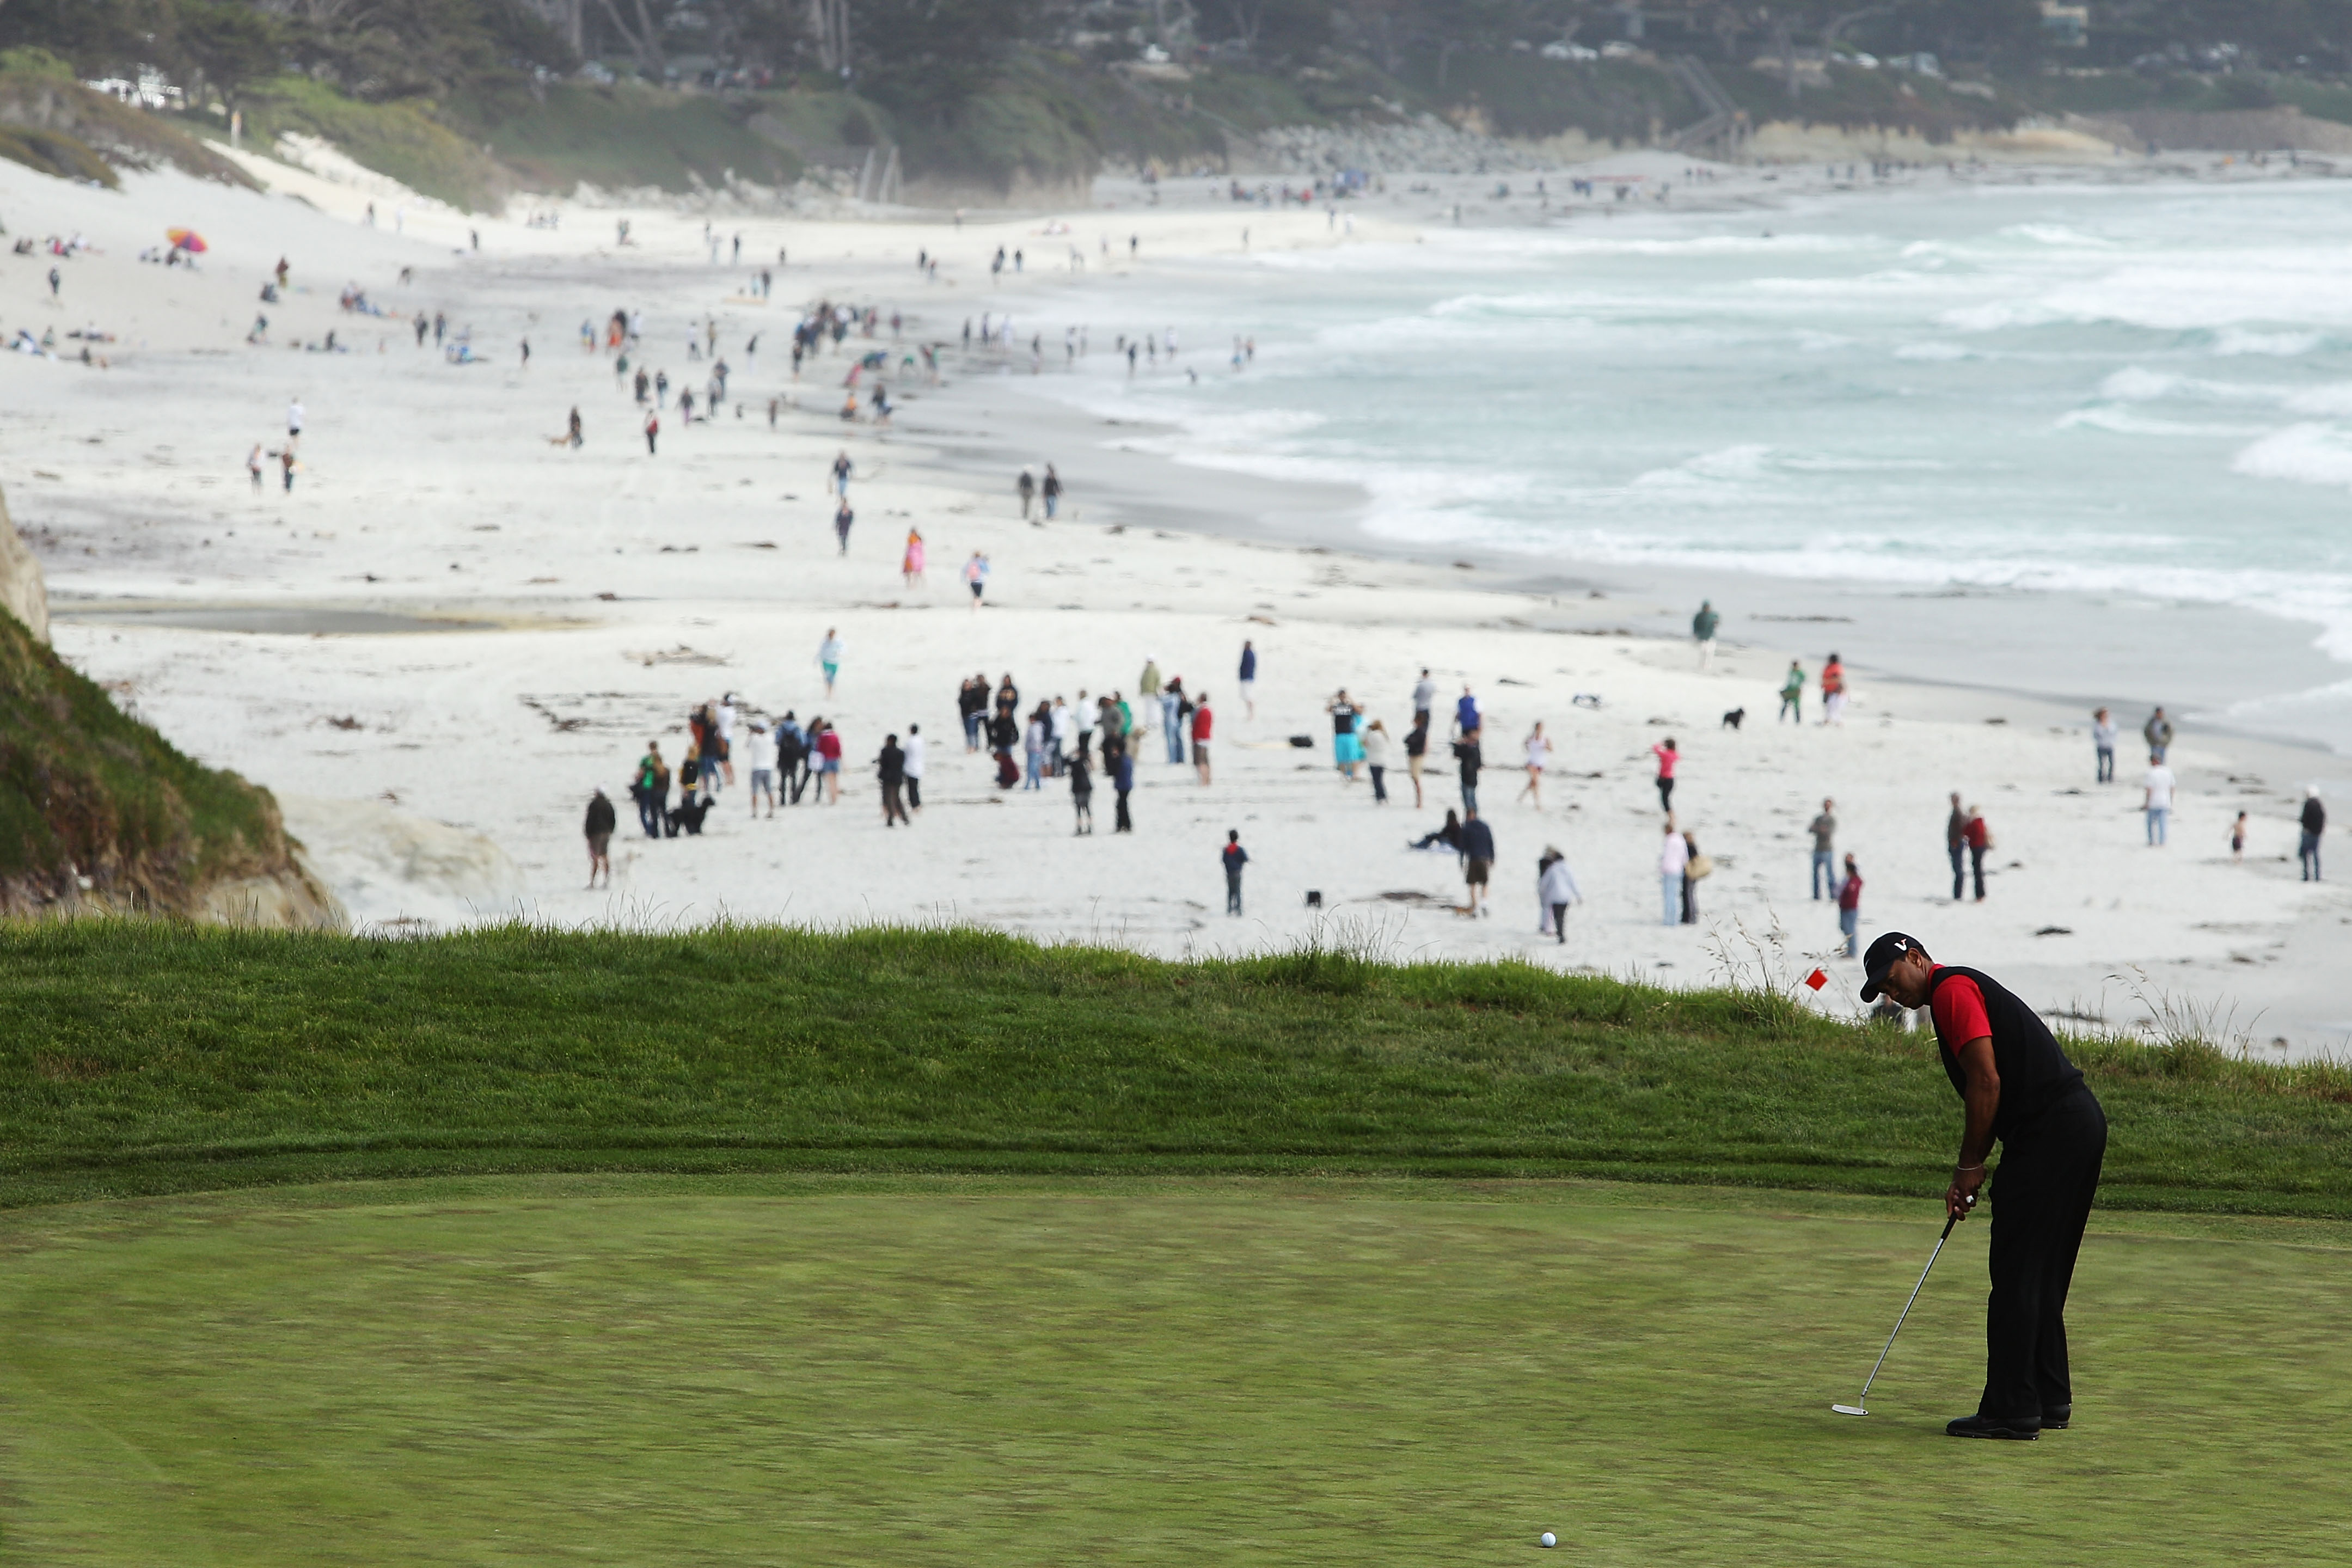 PEBBLE BEACH, CA - JUNE 20:  Tiger Woods watches a putt on the ninth green during the final round of the 110th U.S. Open at Pebble Beach Golf Links on June 20, 2010 in Pebble Beach, California.  (Photo by Donald Miralle/Getty Images)